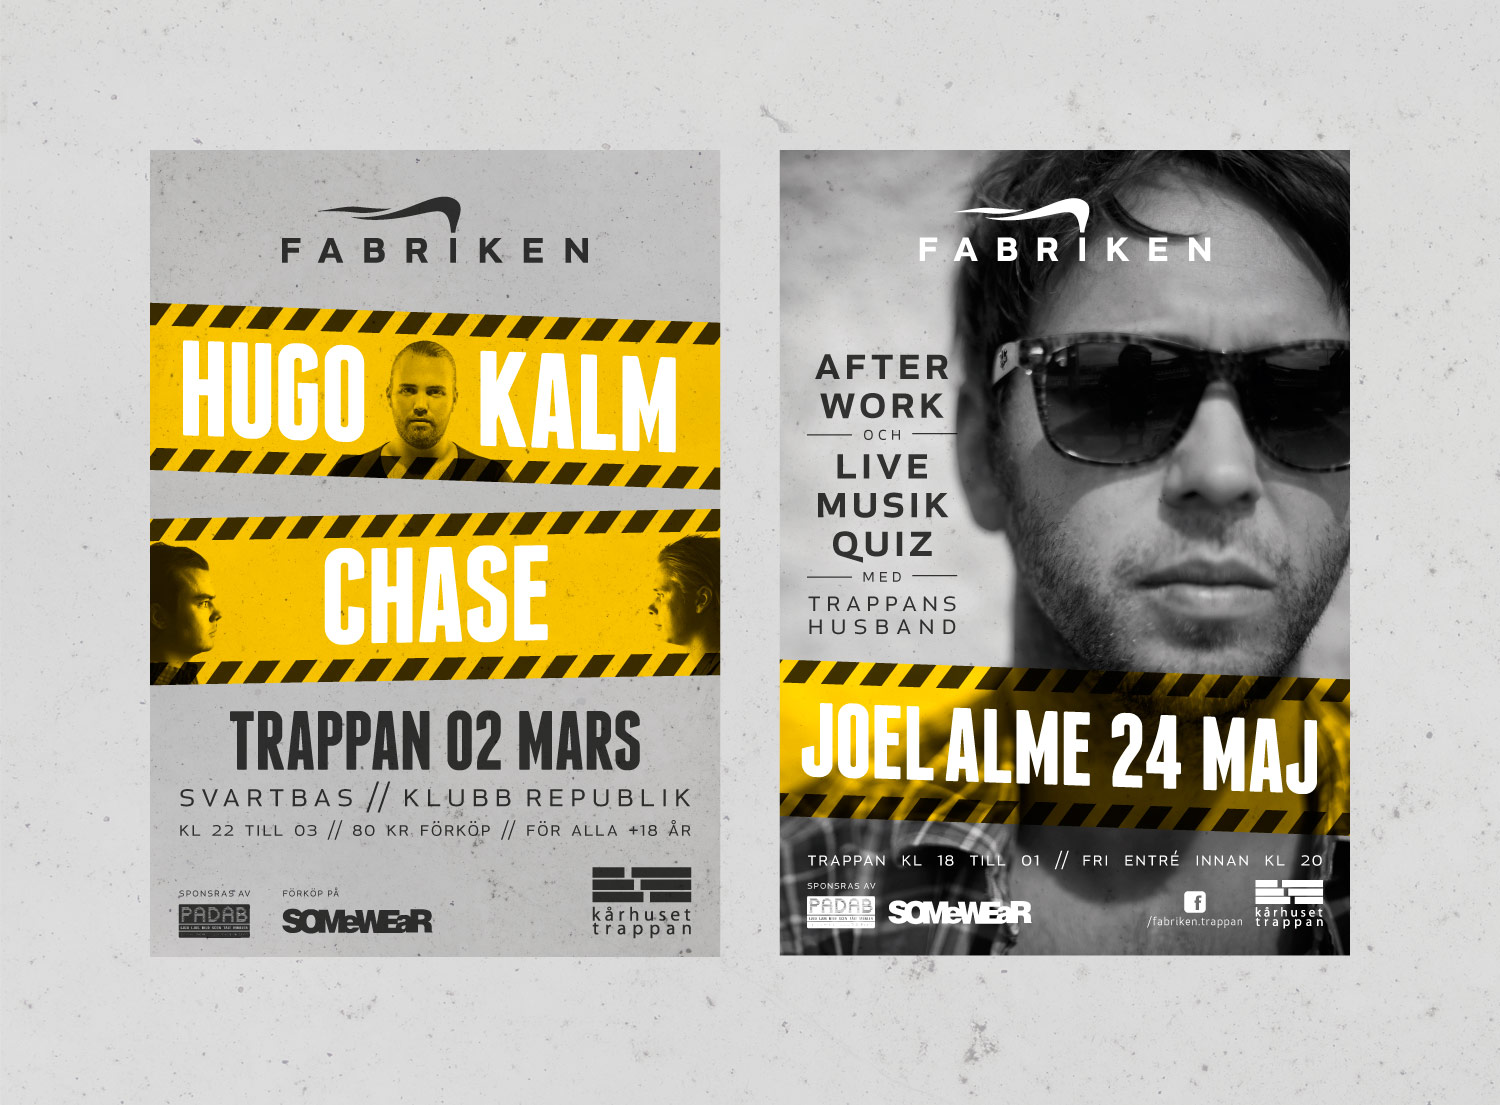 Fabriken #01 and #02 posters by Viktor Lanneld